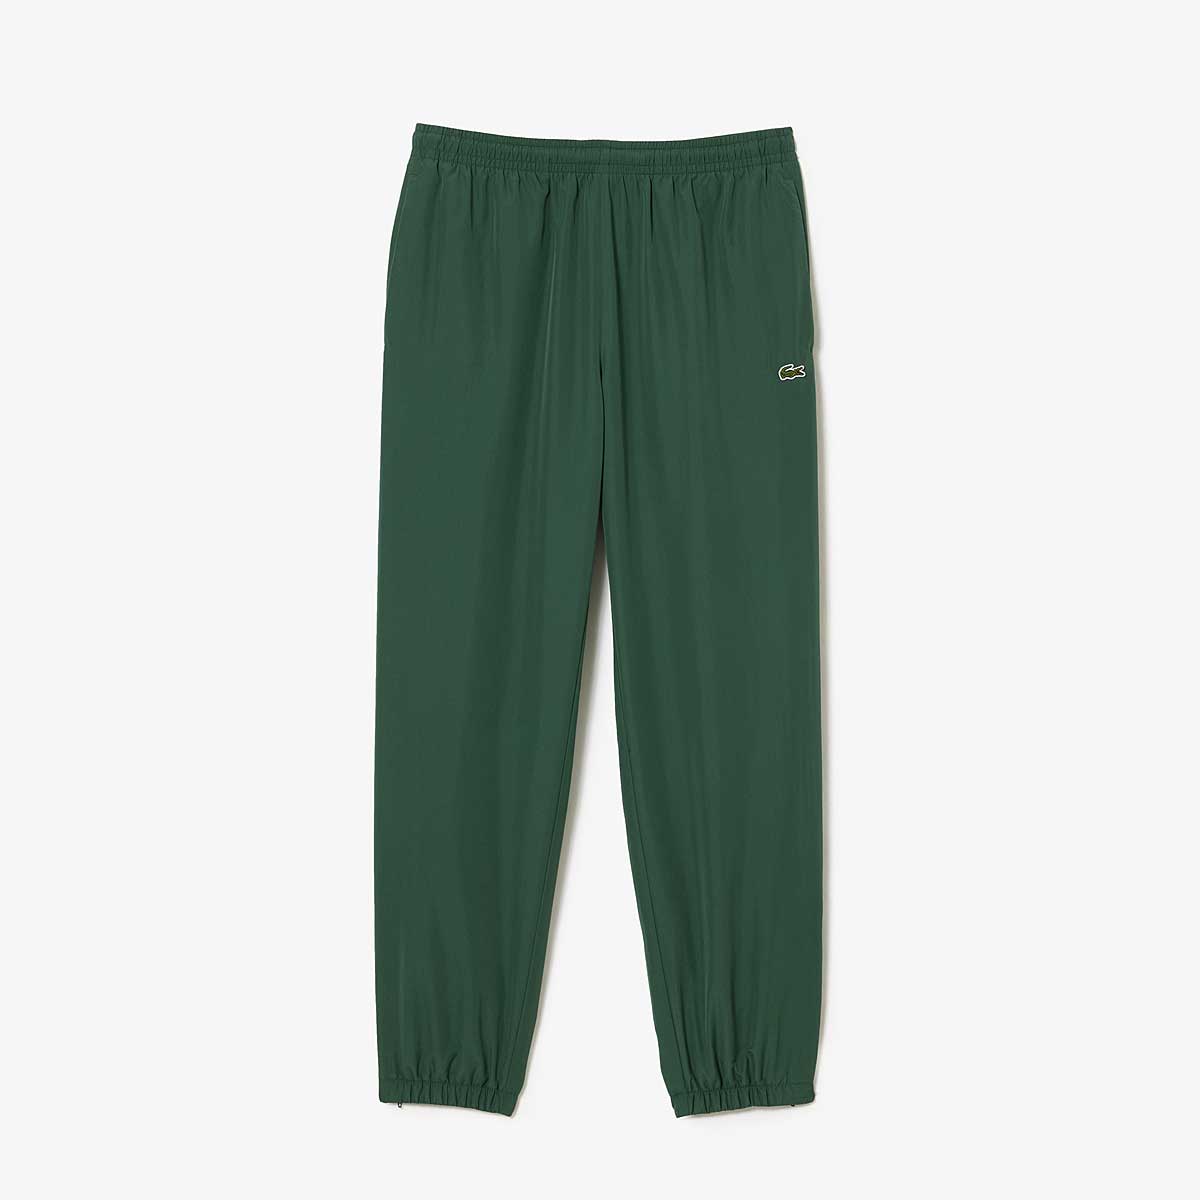 Image of Lacoste Track Pant, Dark Green